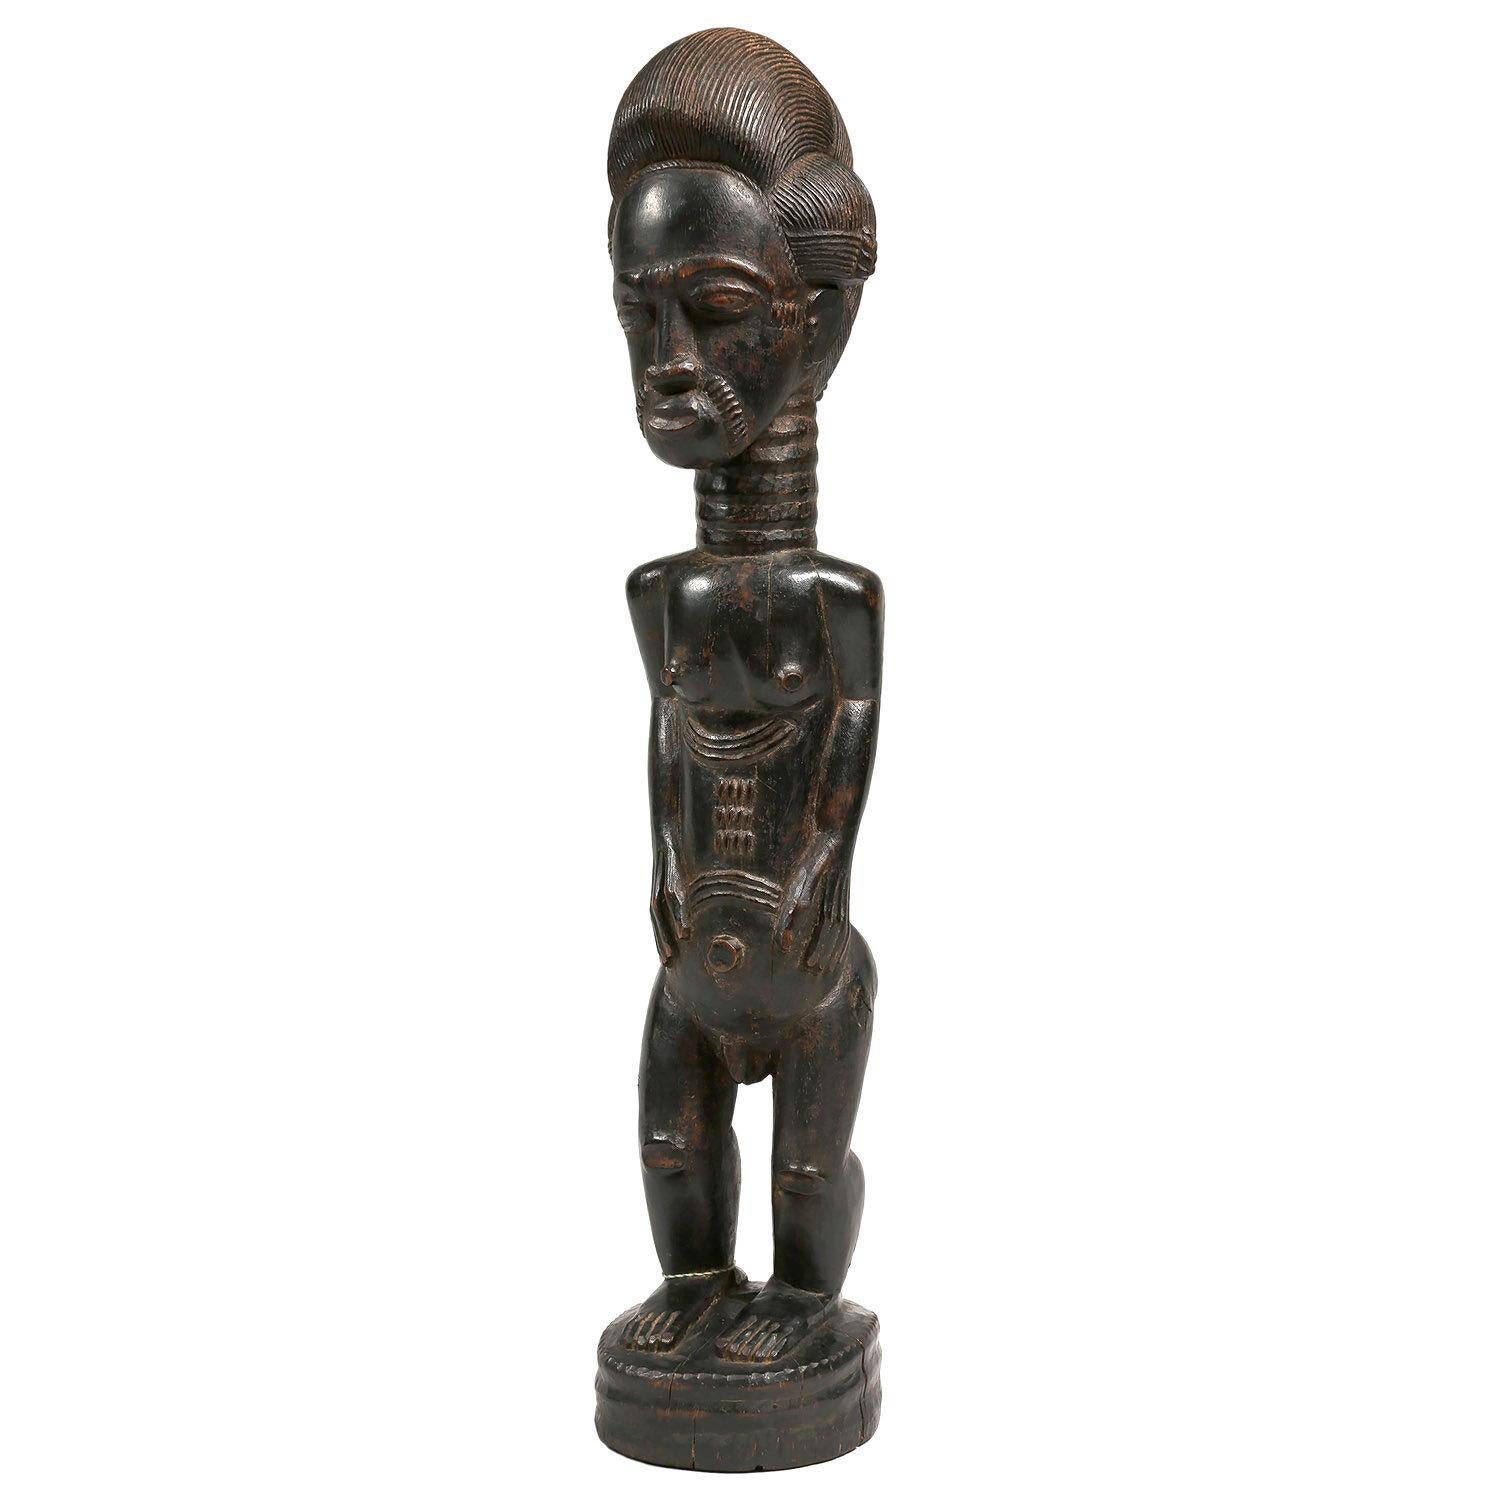 Early 20th century male baule figure, ivory coast, Africa

A stylistically pleasing sculpture of a spiritual spouse (blolo bian) from the Baule culture. This excellent example is posed in the Classic Baule power posture and hits all the